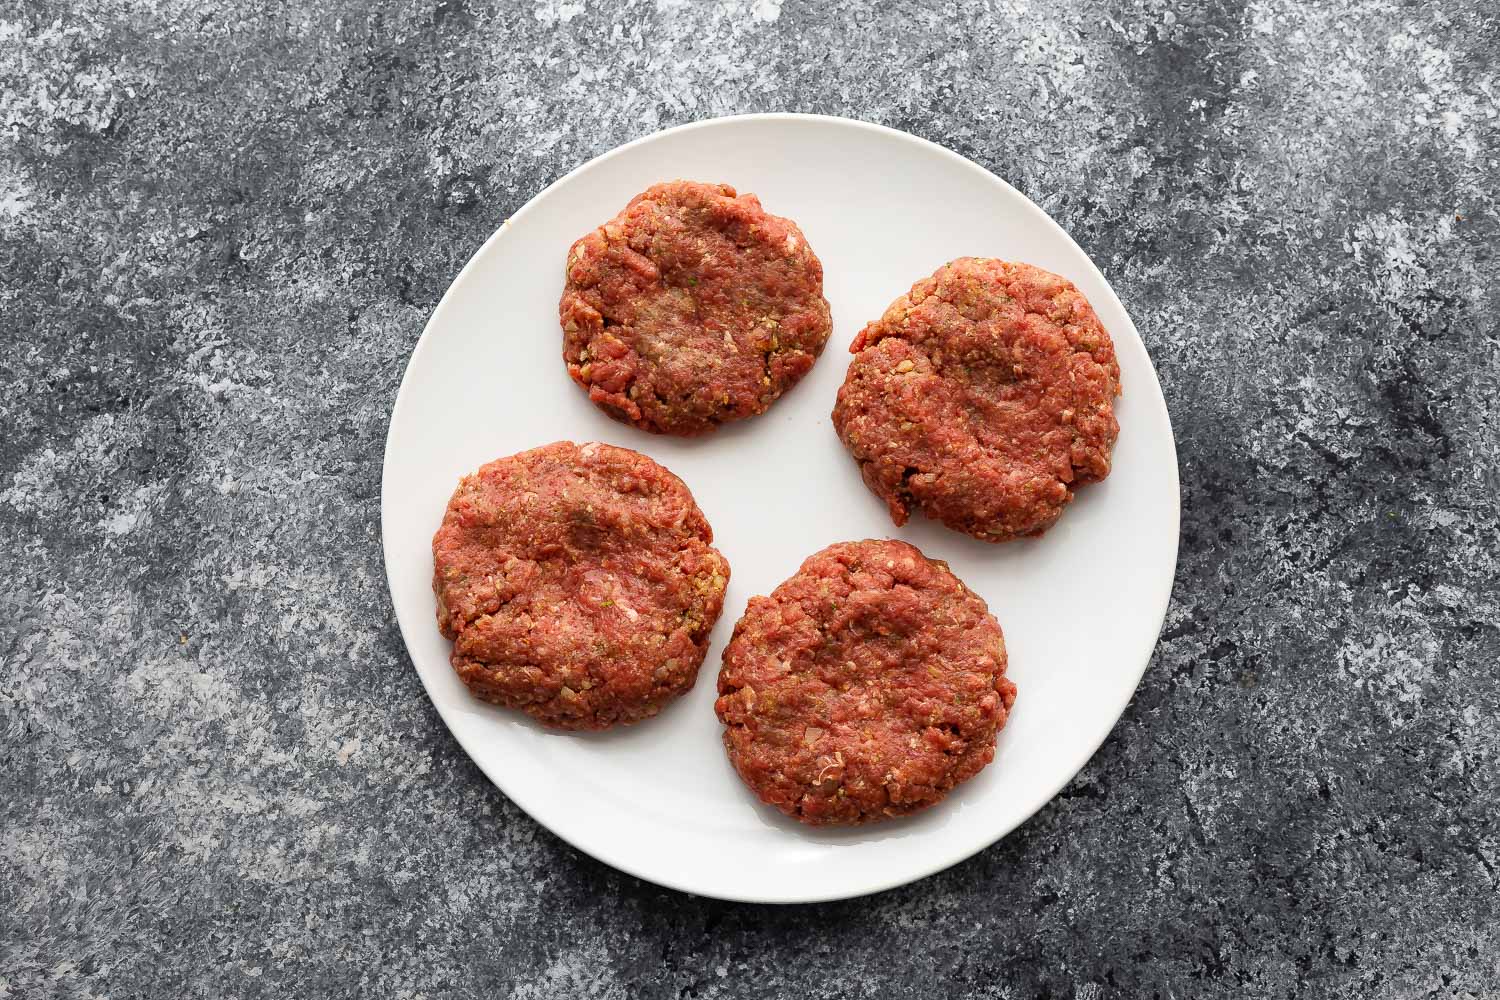 patties for air fryer burgers on plate